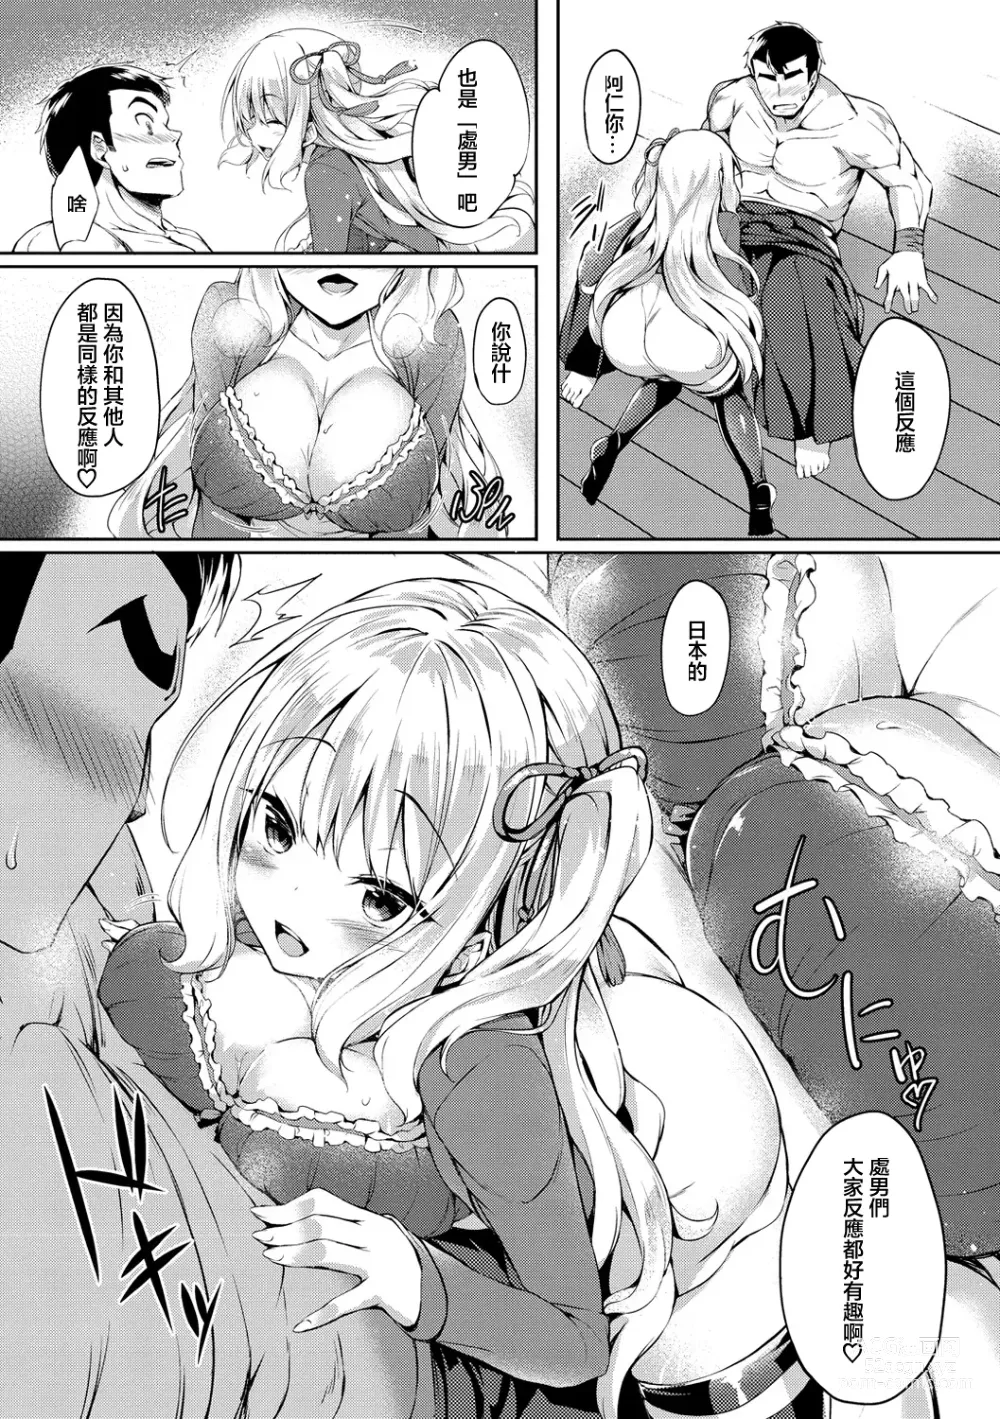 Page 4 of manga LETS PLAY WITH ME!